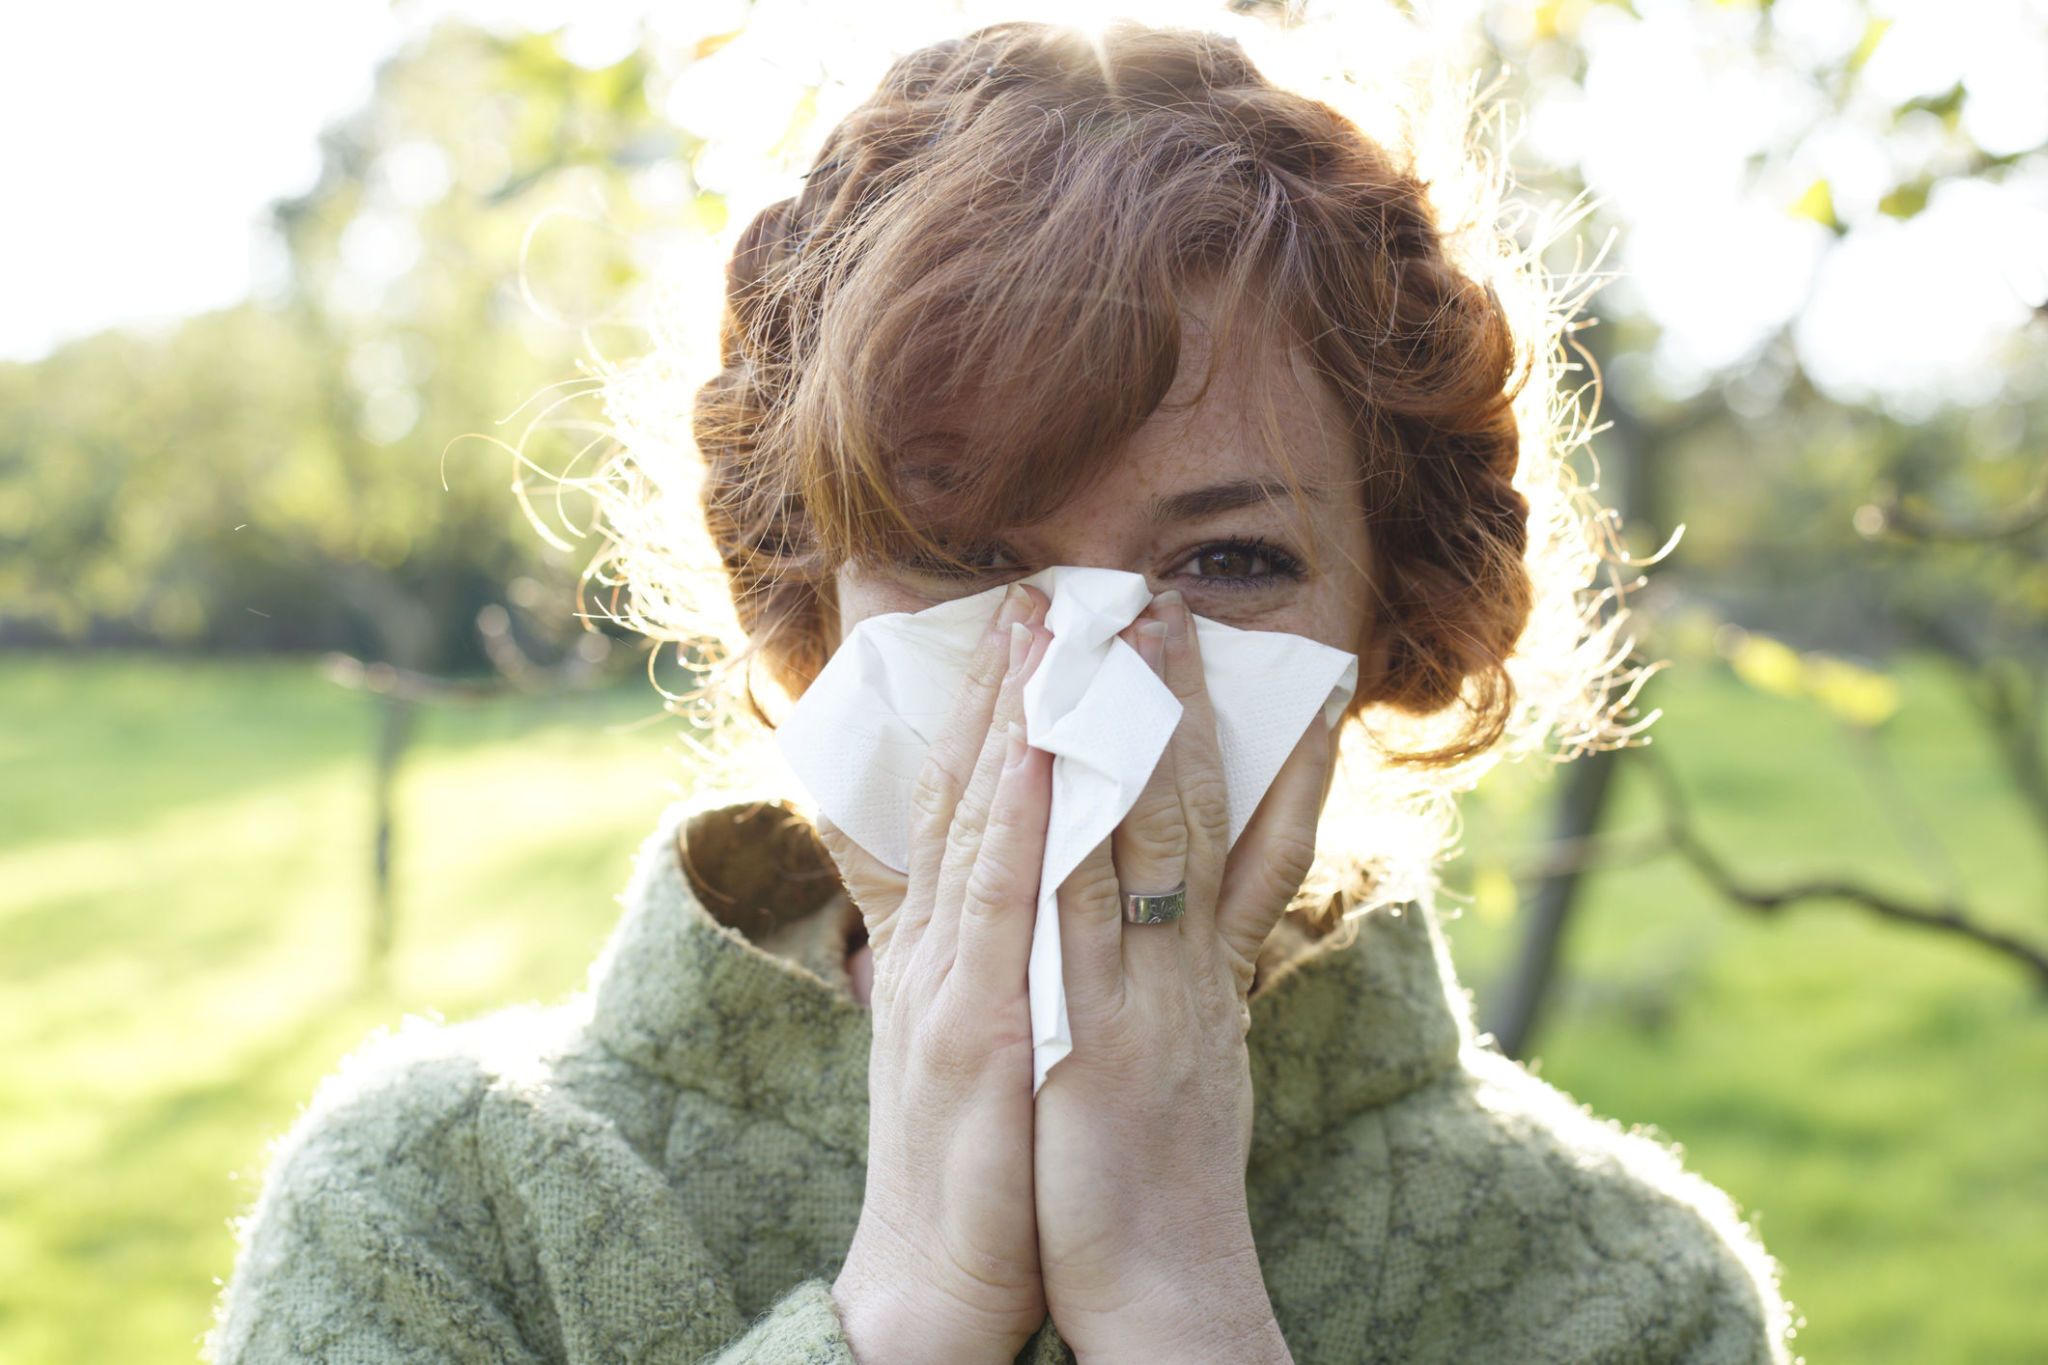 Woman sneezing and blowing her nose in a field